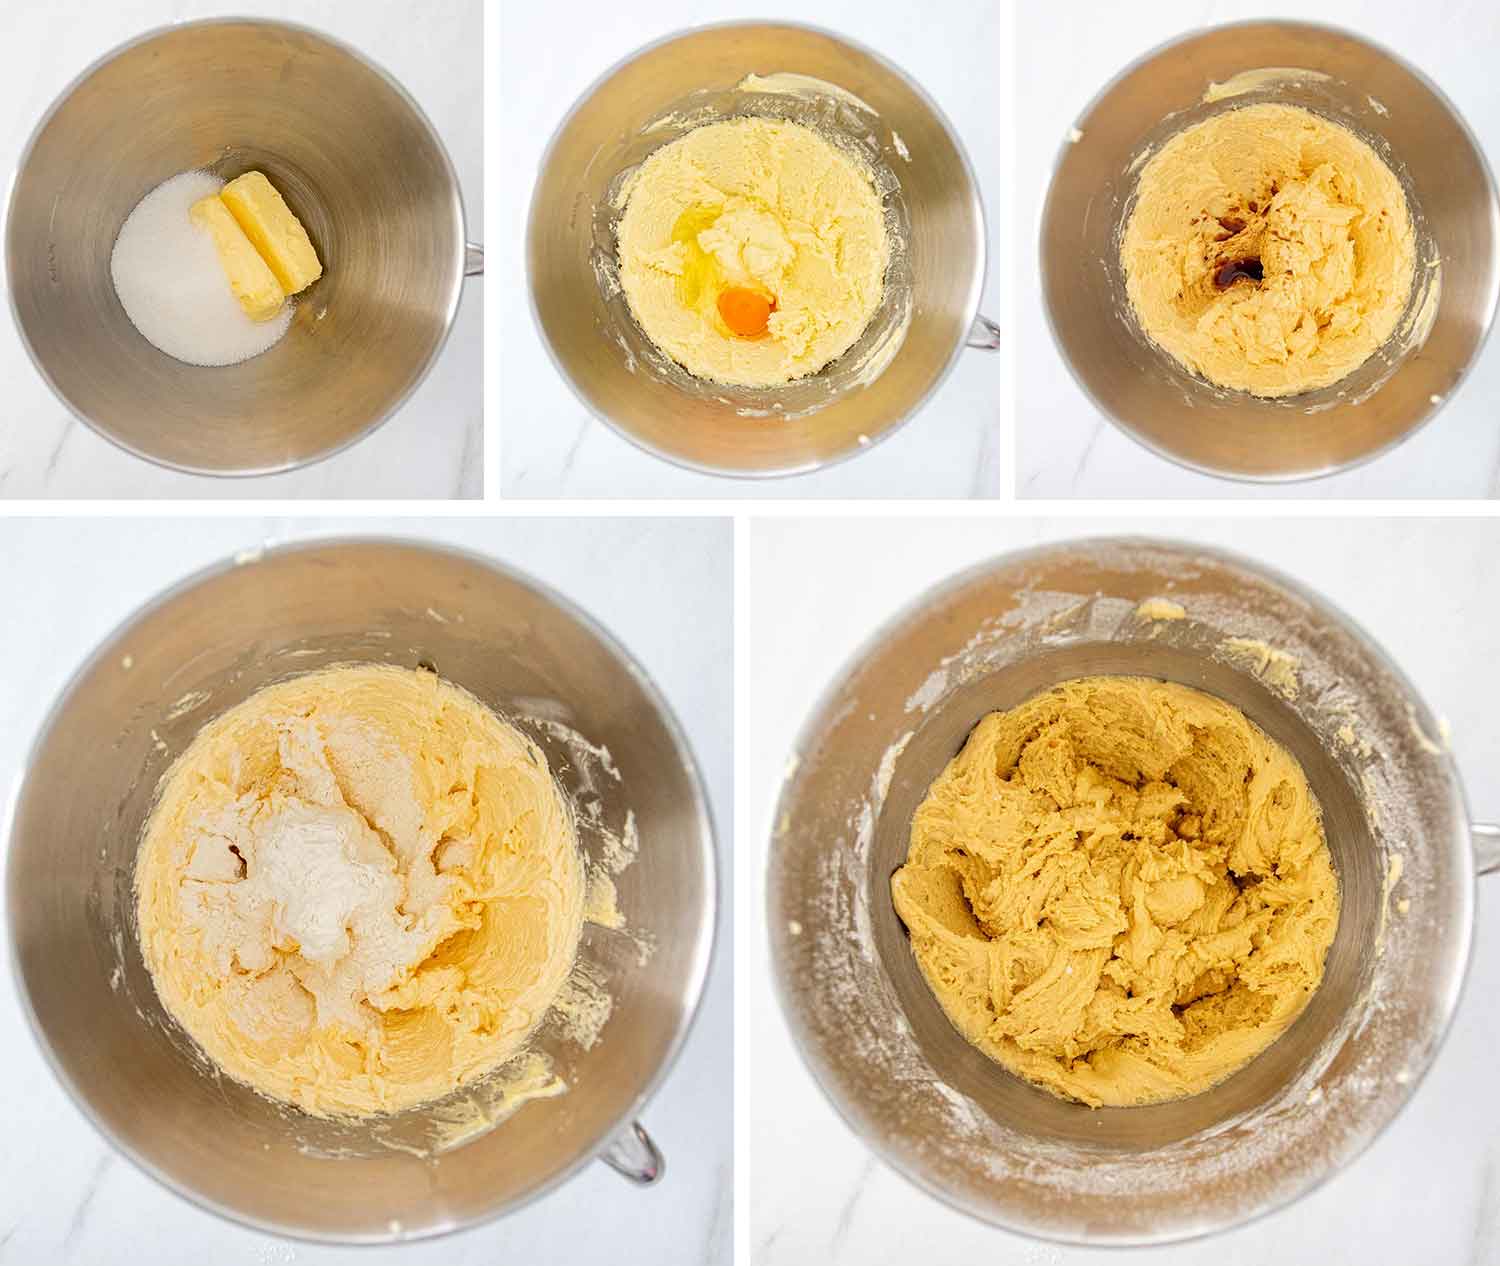 process shots showing how to make snickerdoodles.